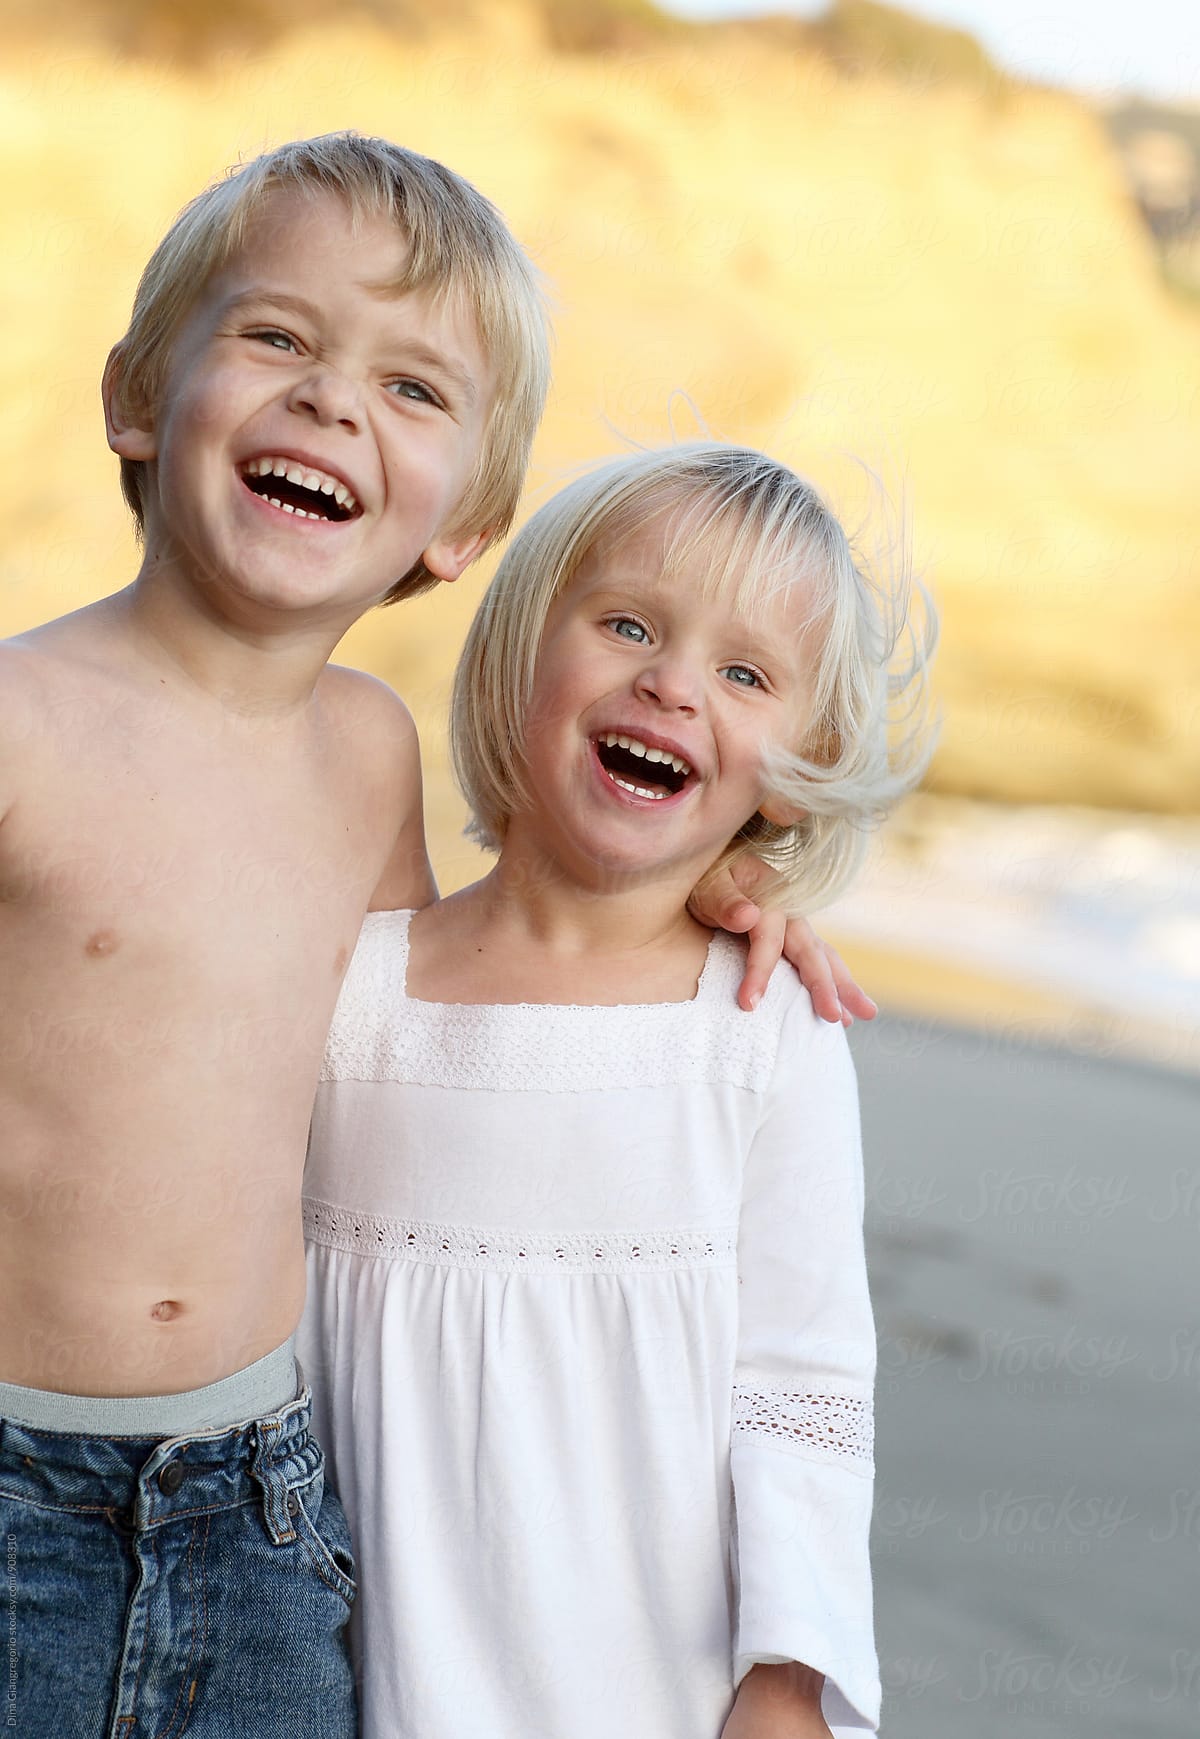 Blonde Boy And Girl Laughing On Beach by Dina Marie Giangregorio